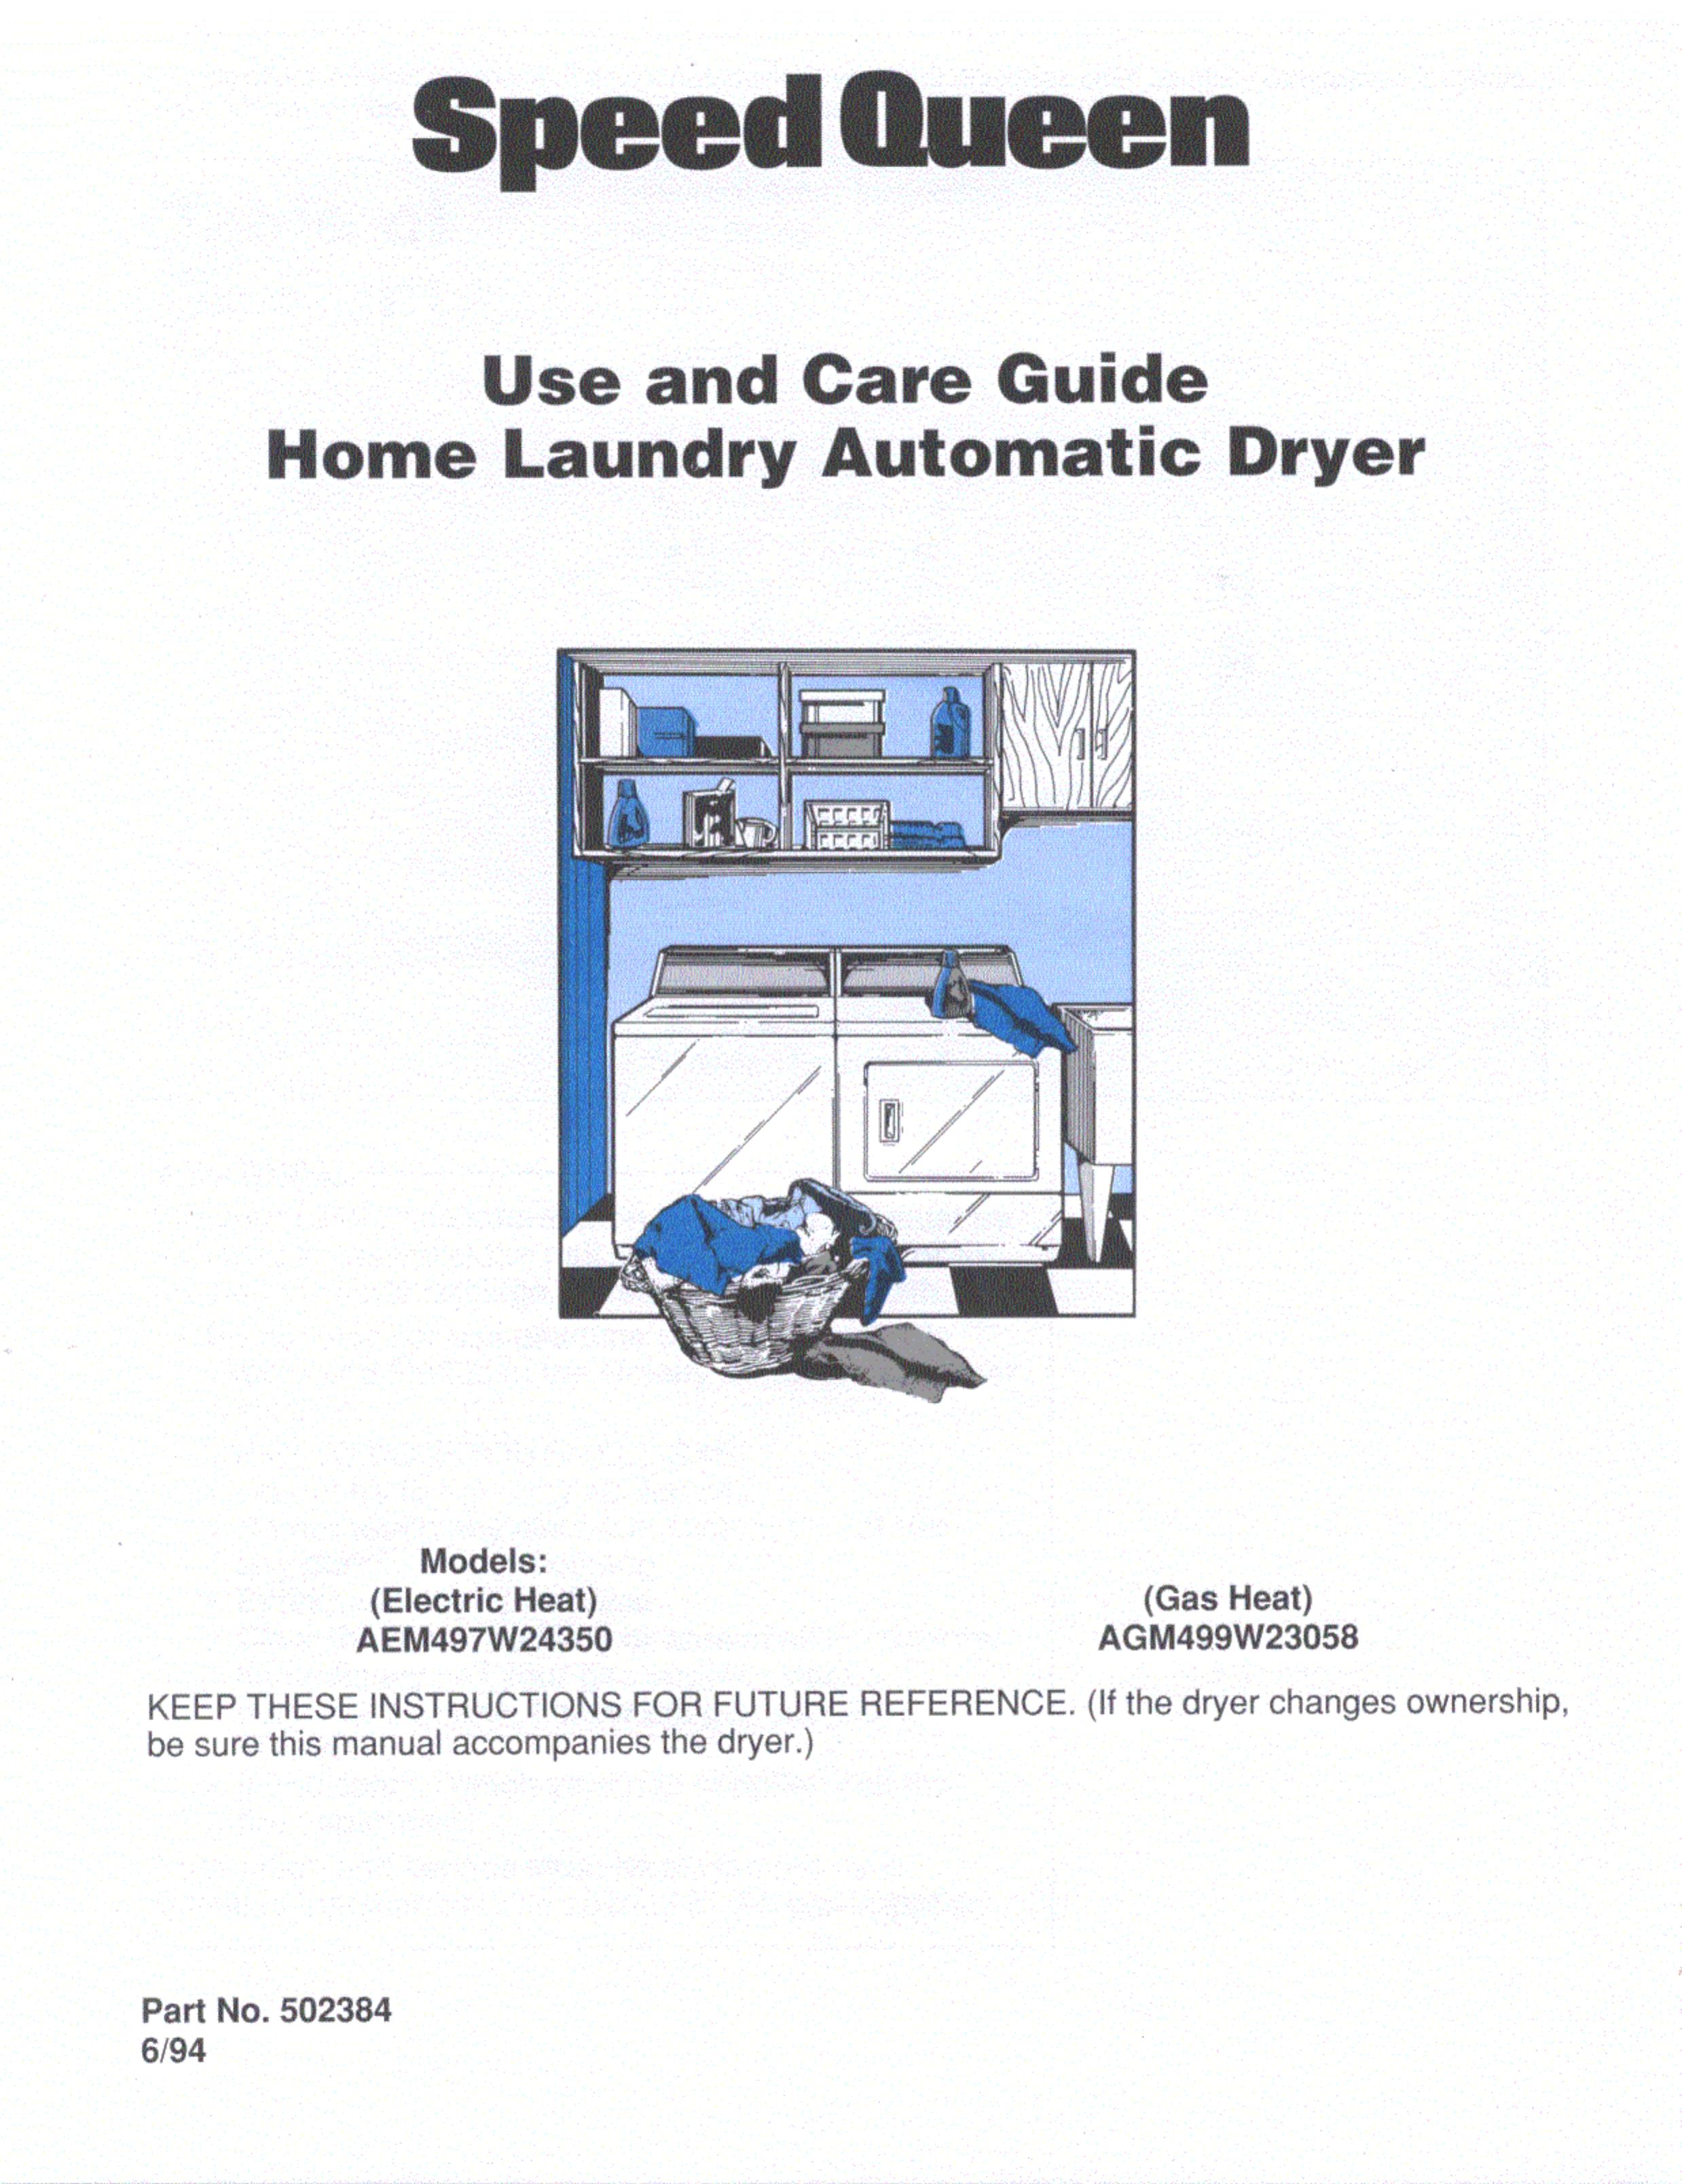 Speed Queen AEM497W24350 Clothes Dryer User Manual